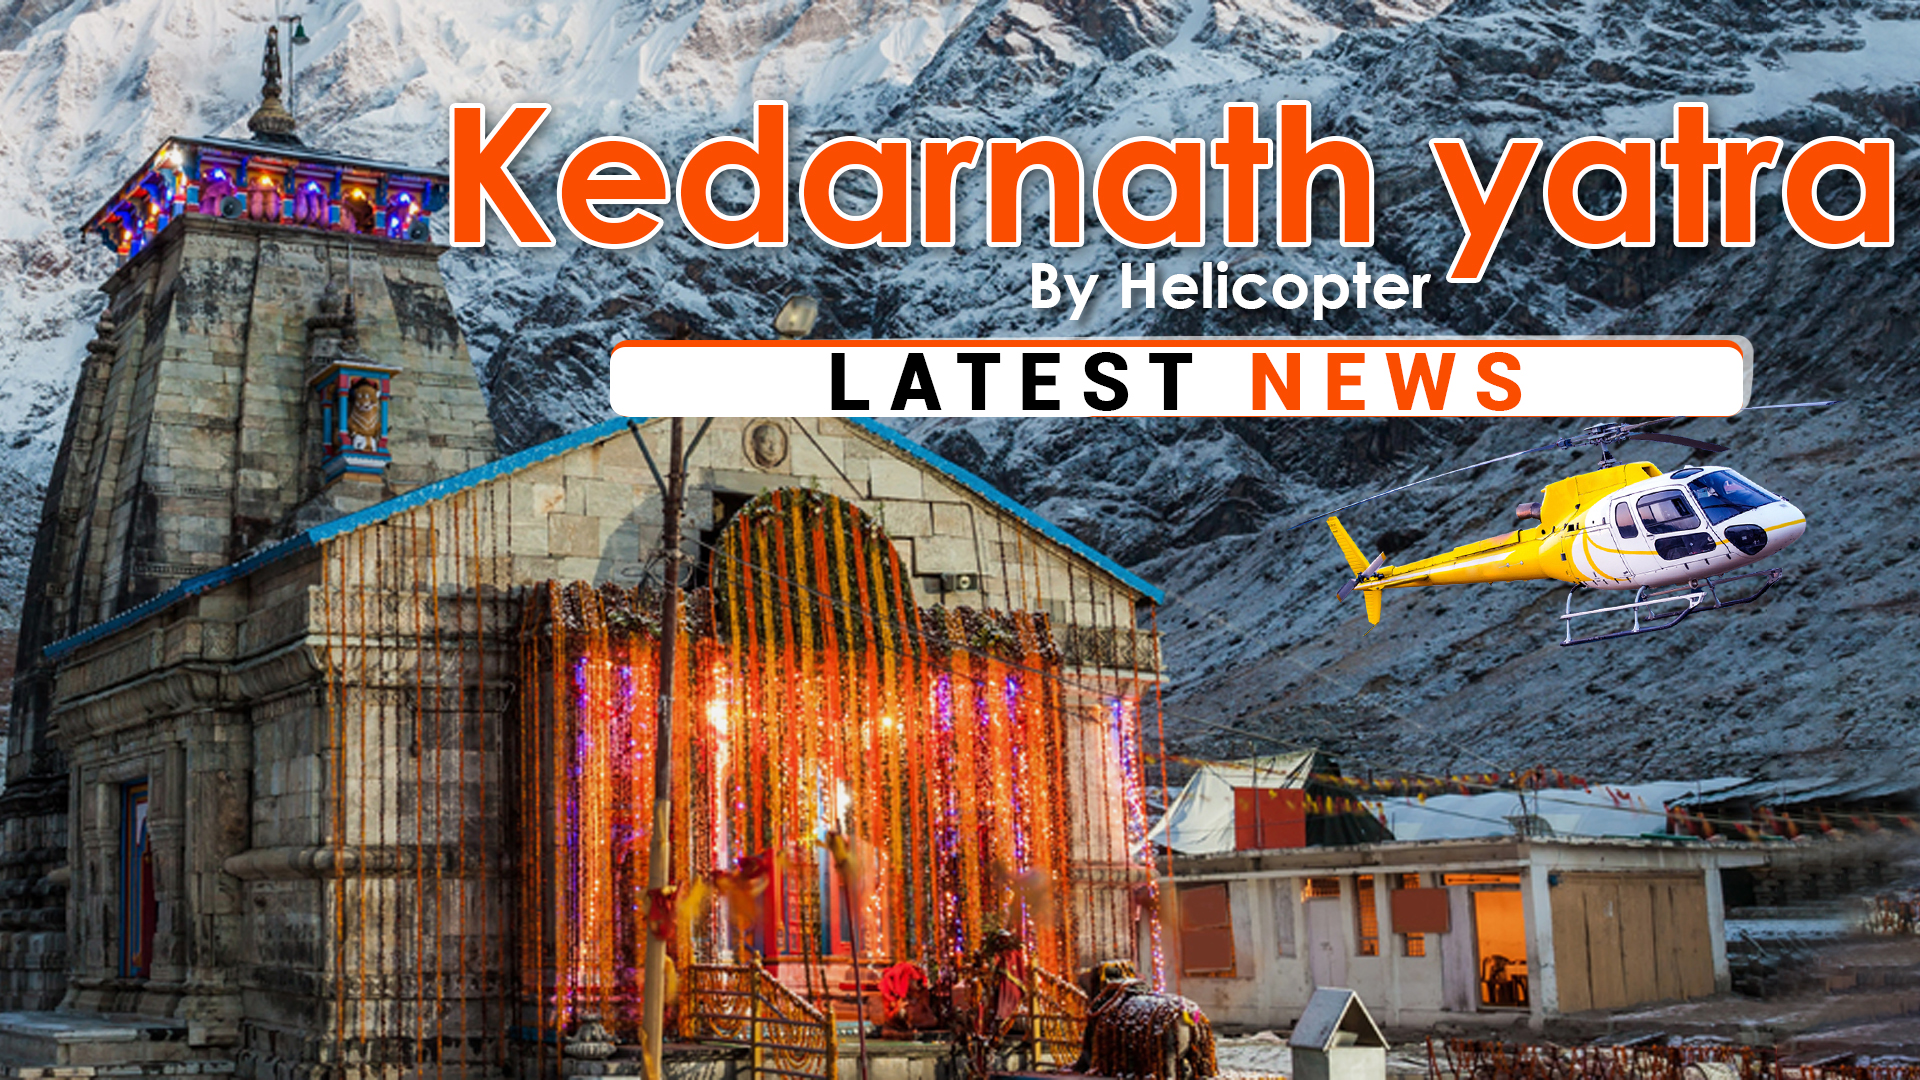 Important News: Helicopter tickets for Kedarnath on resale TODAY due to cancellations